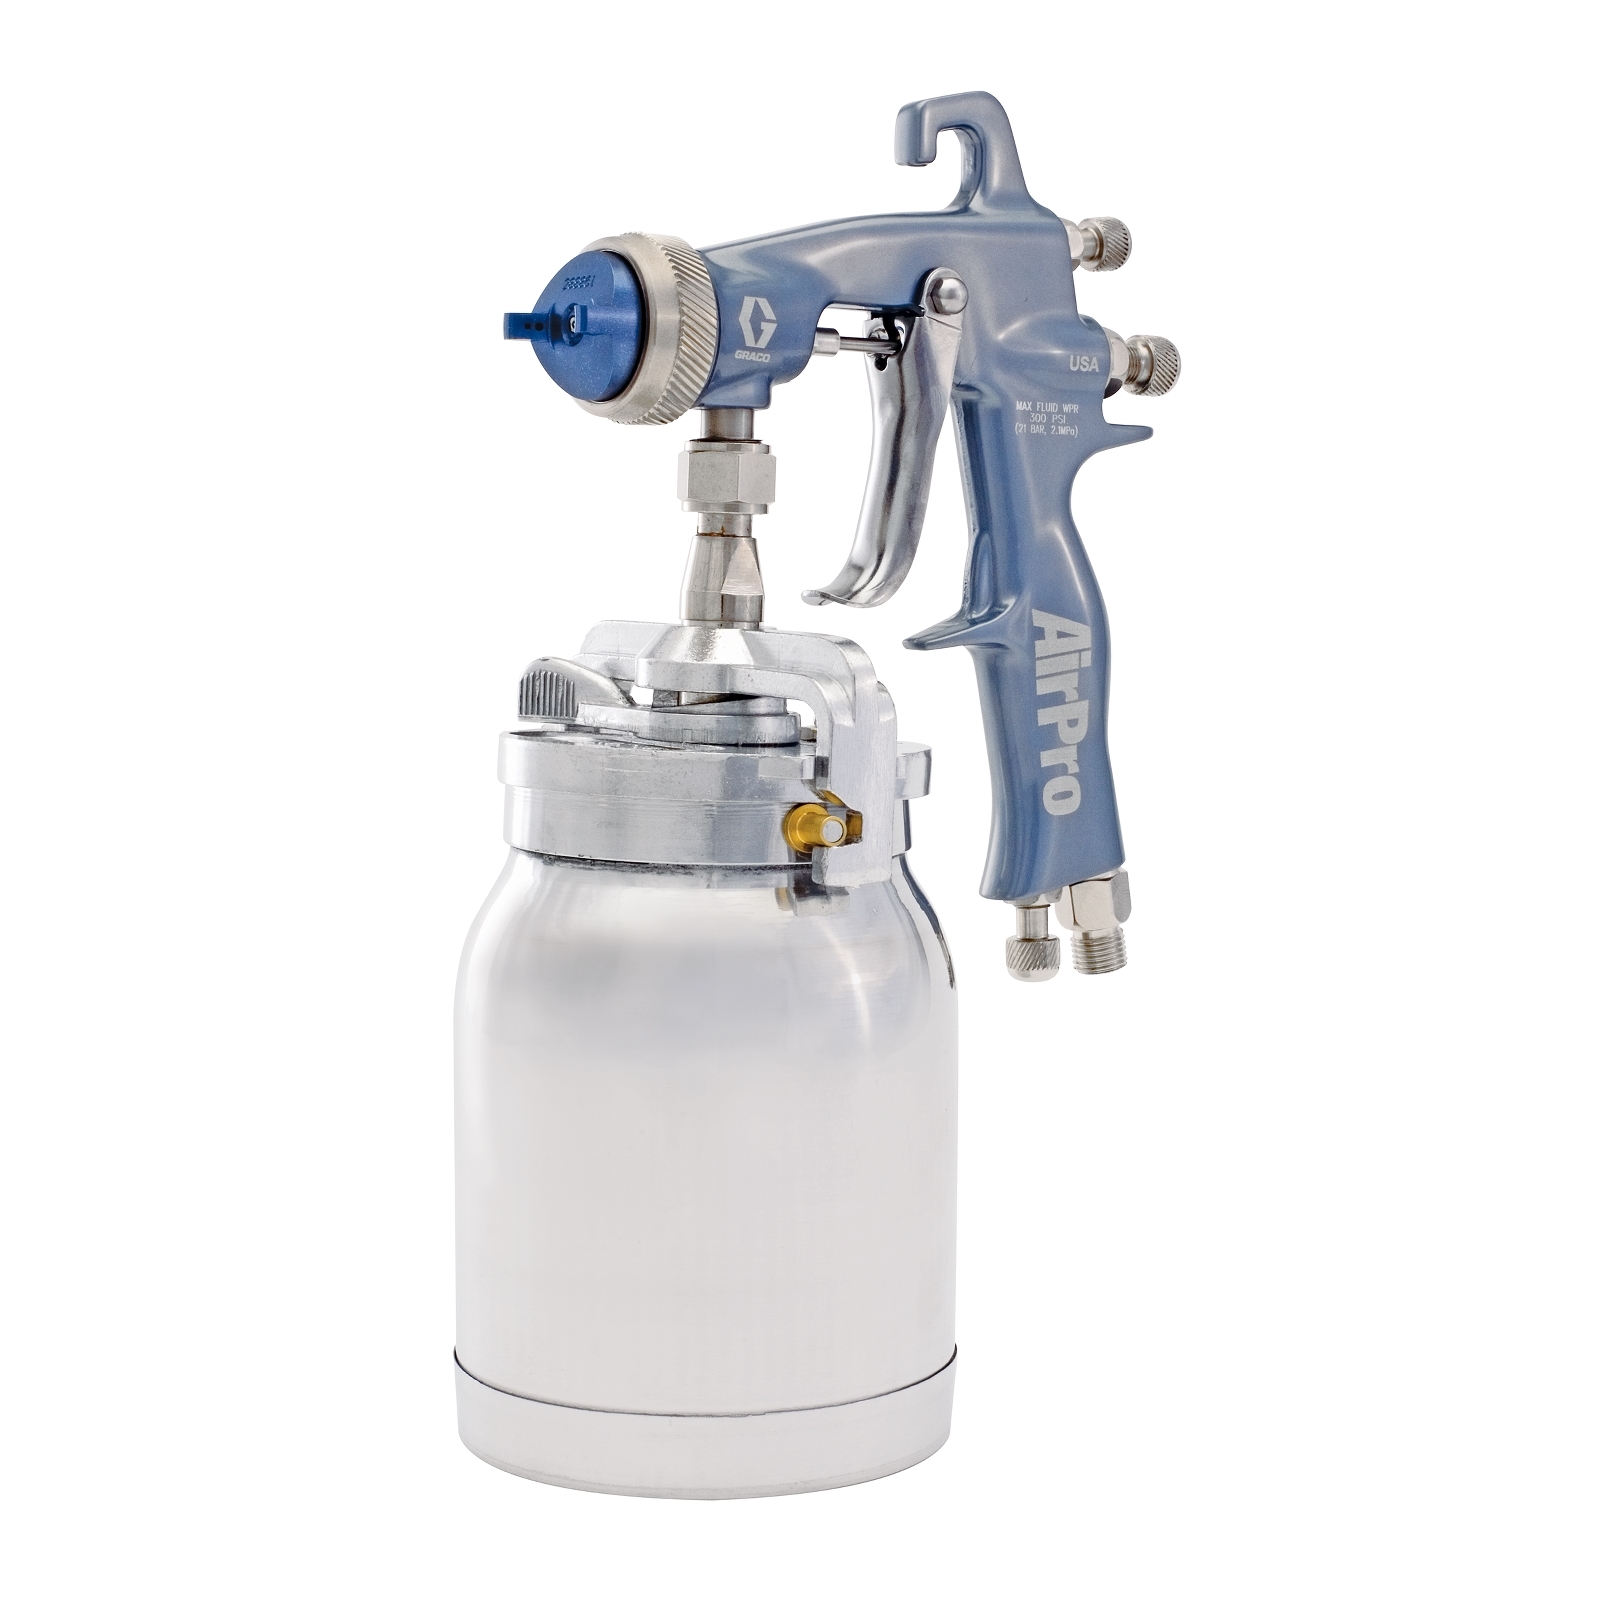 Graco 1 Pc Pneumatic Spray Can Metal Pneumatic Tool Spray with Cup 